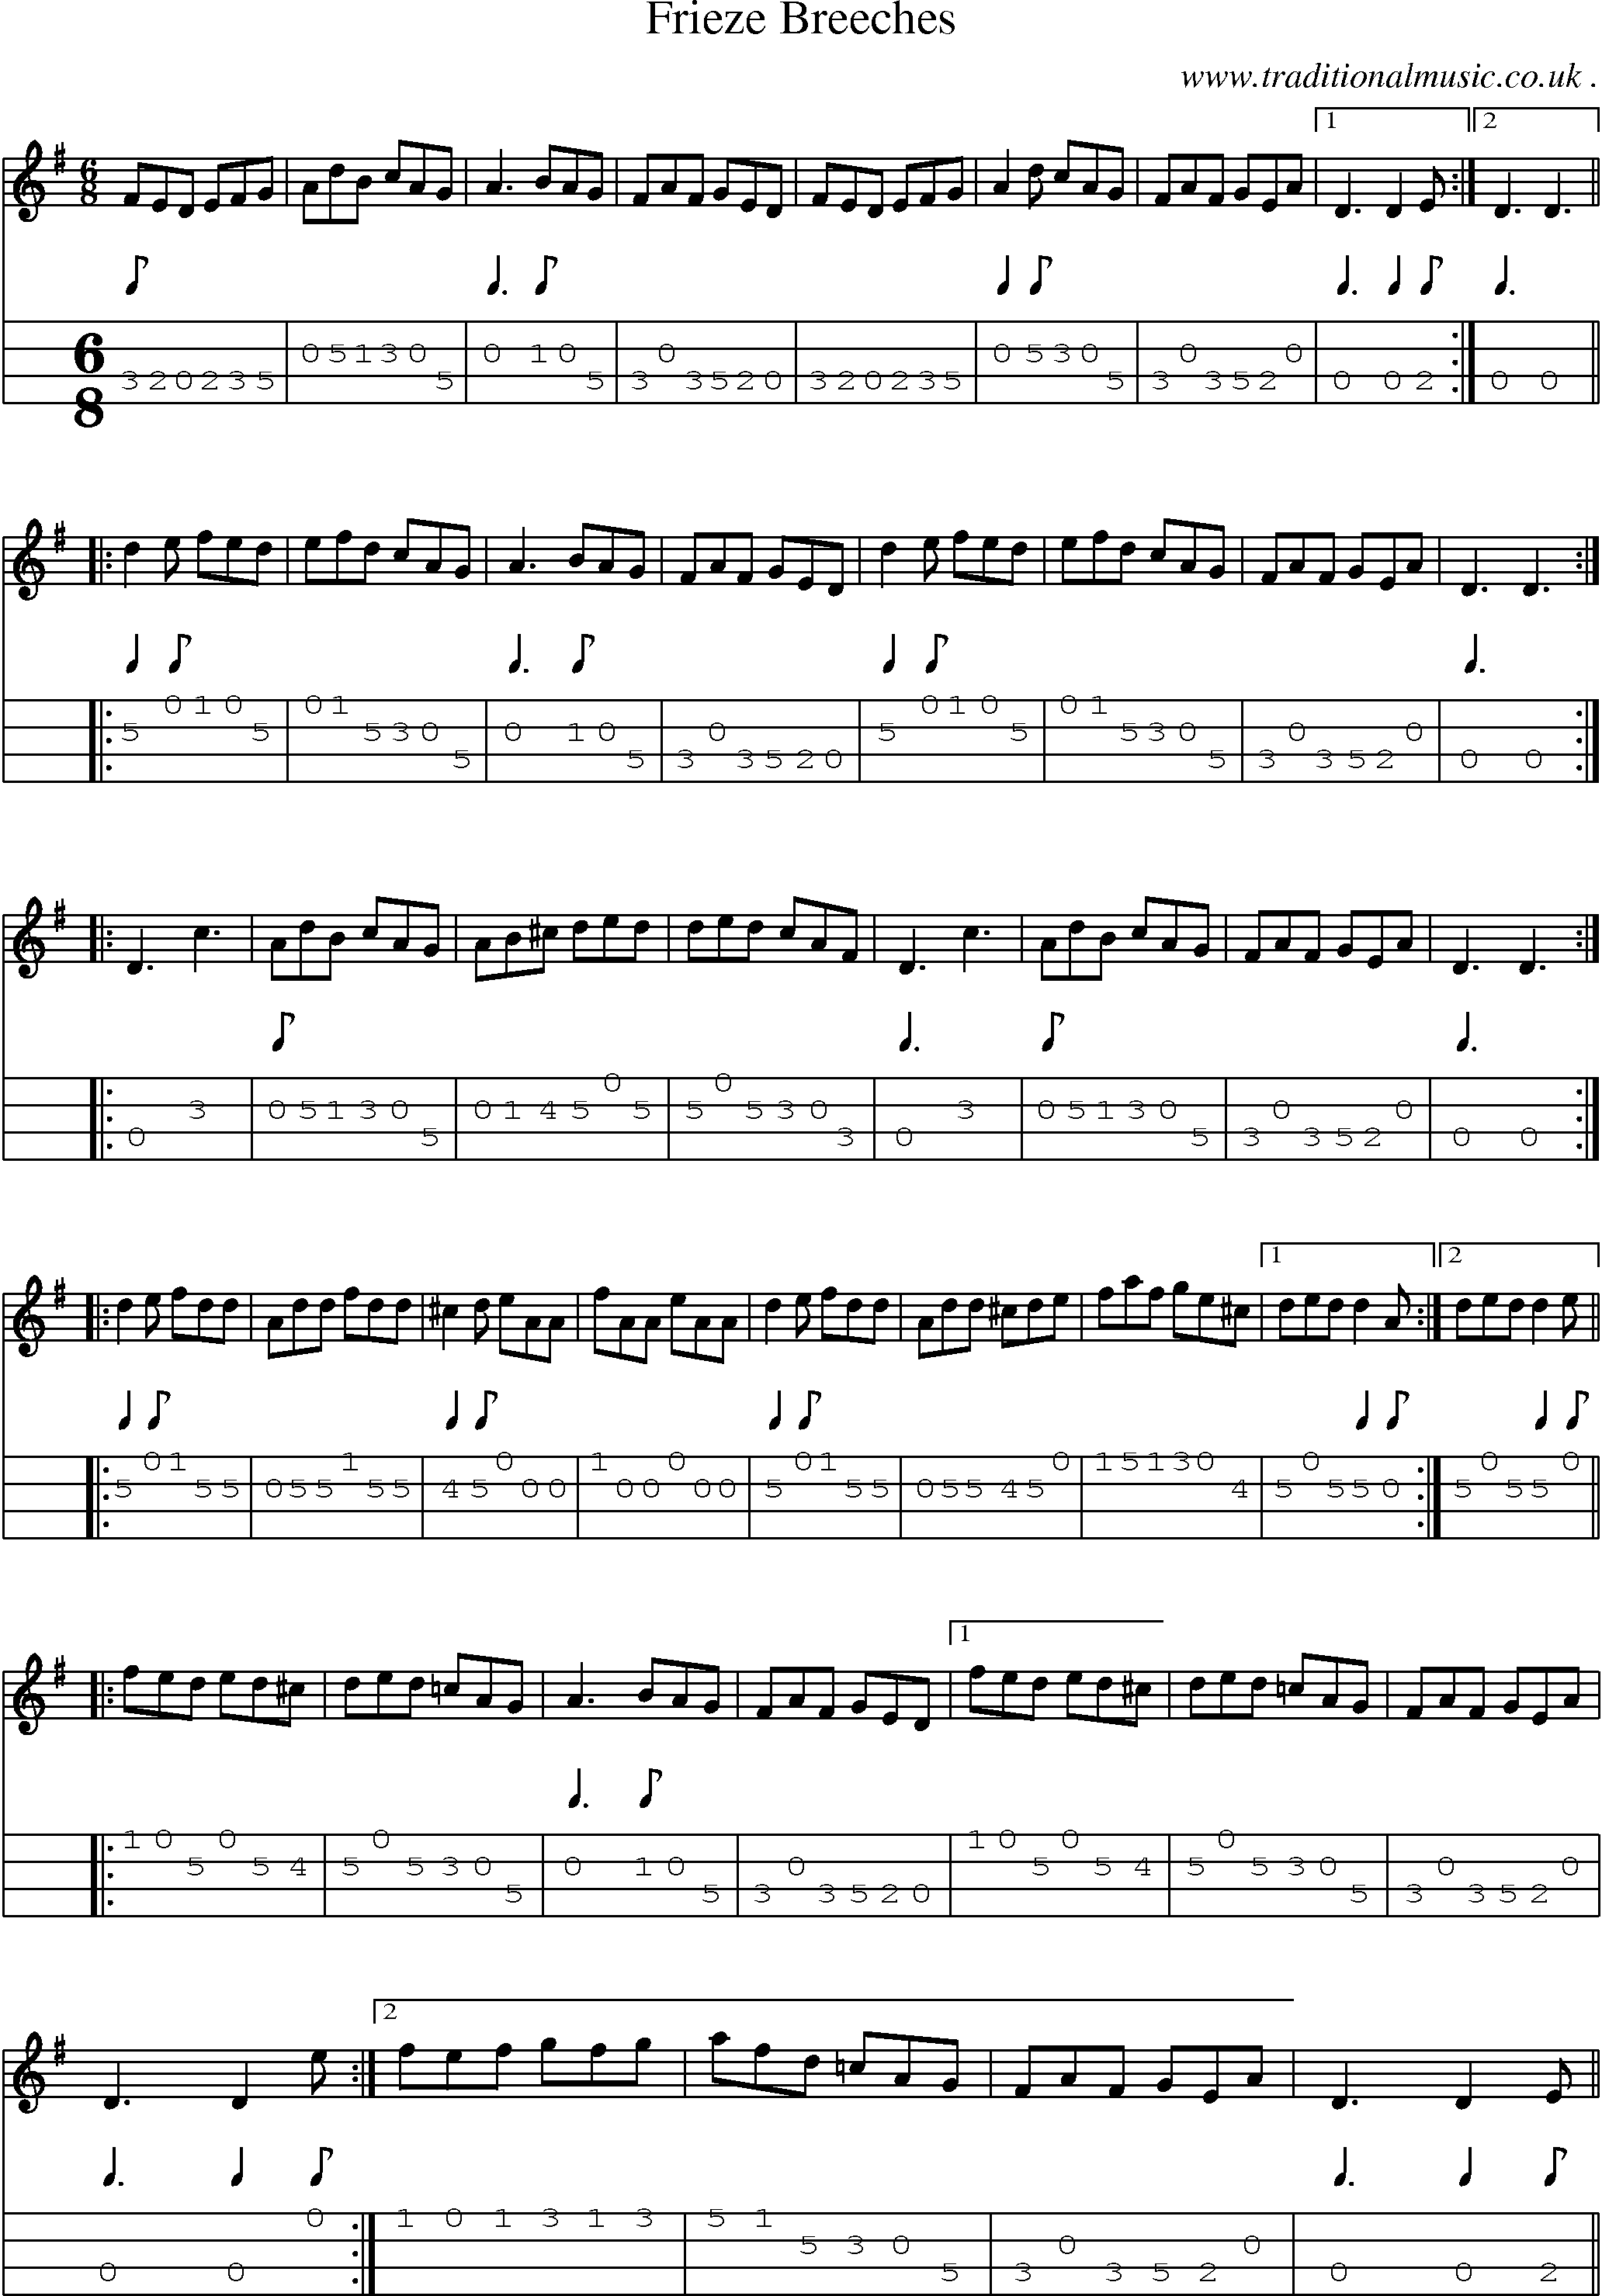 Sheet-Music and Mandolin Tabs for Frieze Breeches